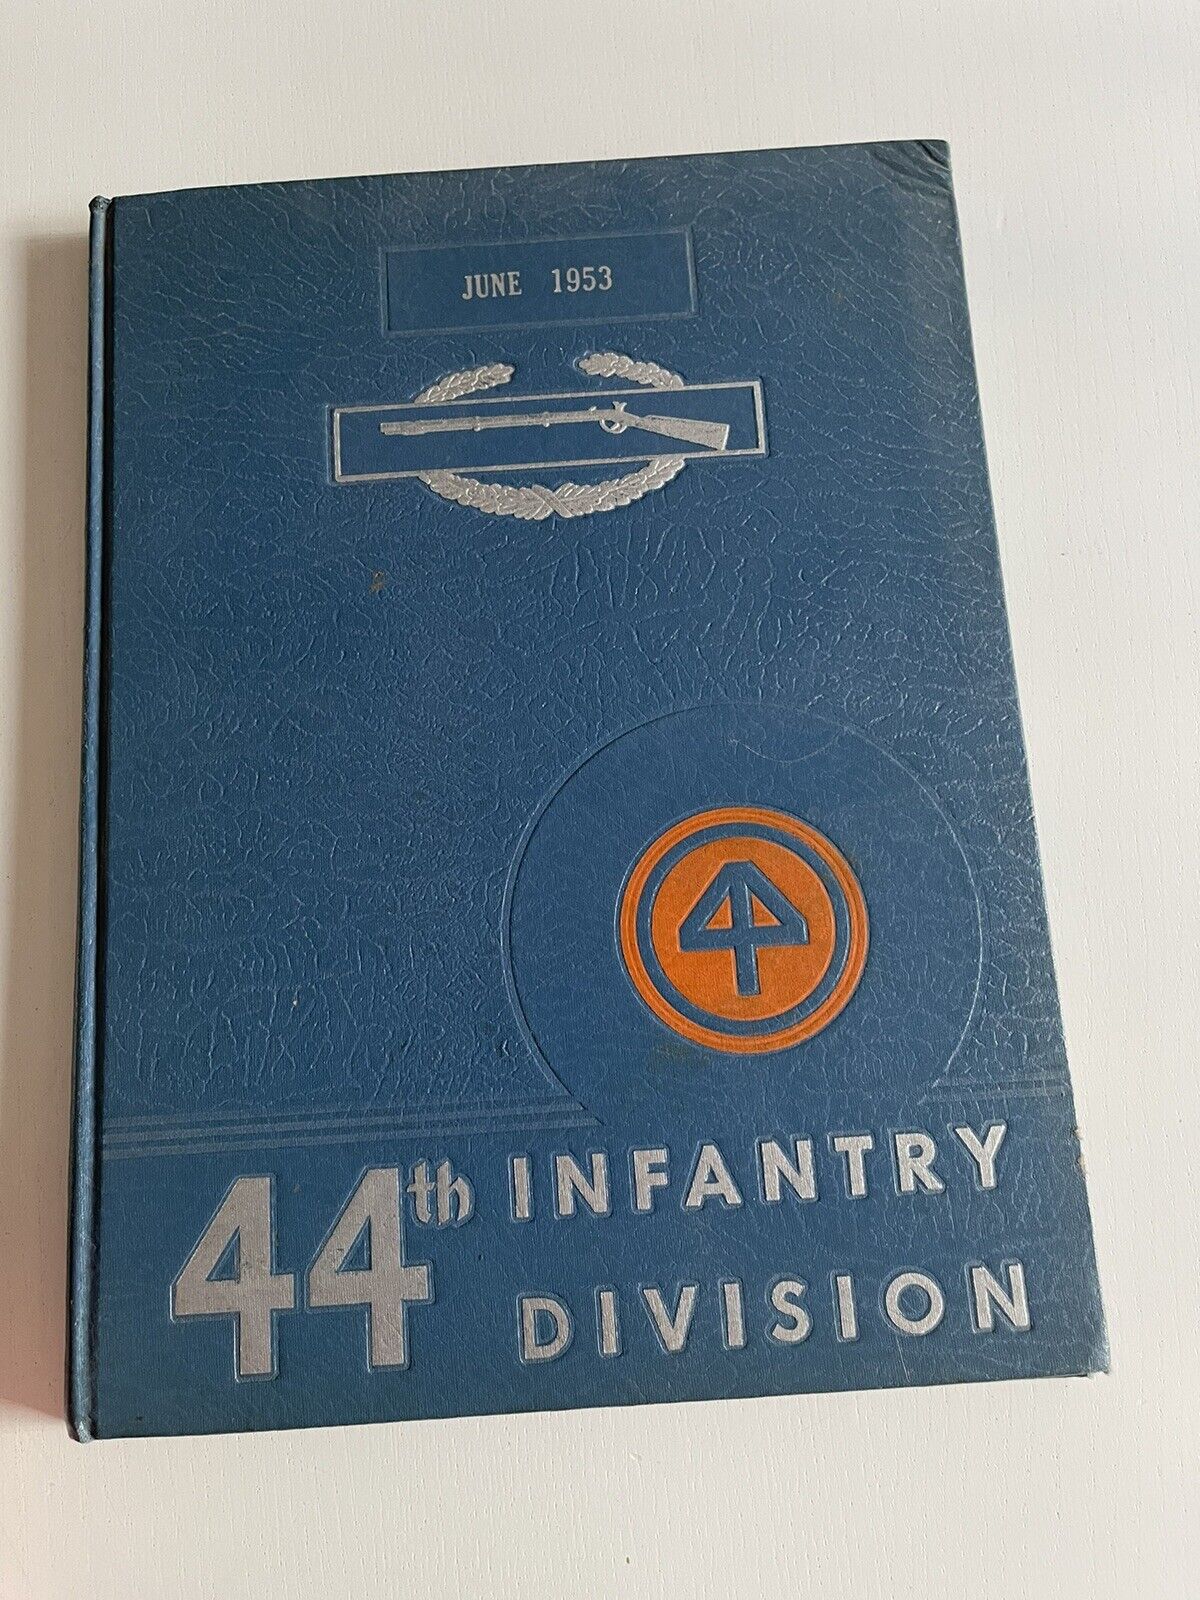 June 1953 44th Infantry Division Class Book Fort Lewis Washington